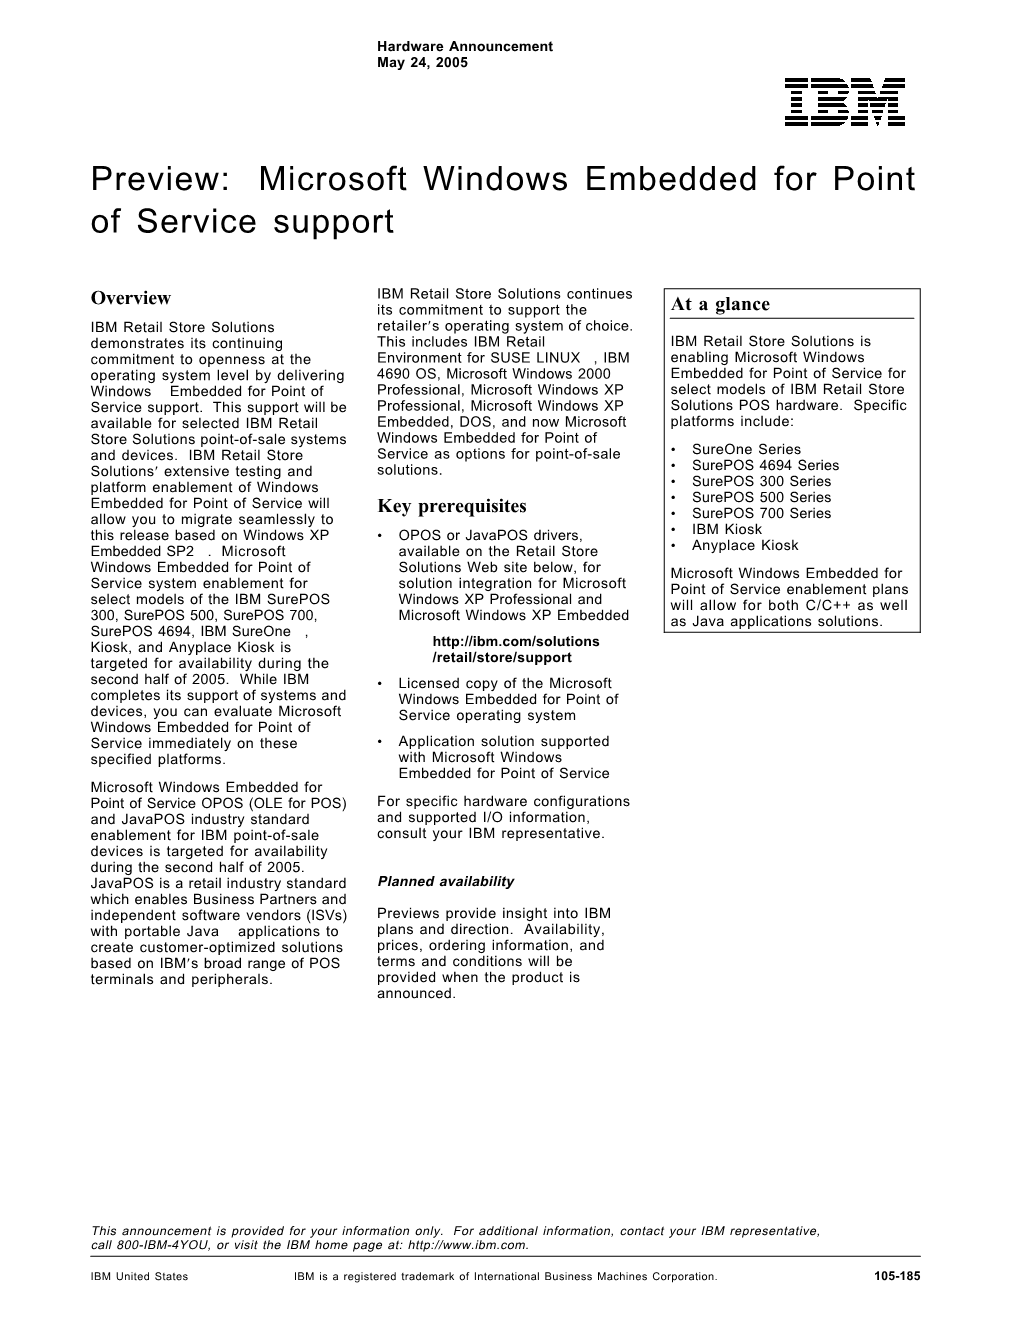 Microsoft Windows Embedded for Point of Service Support